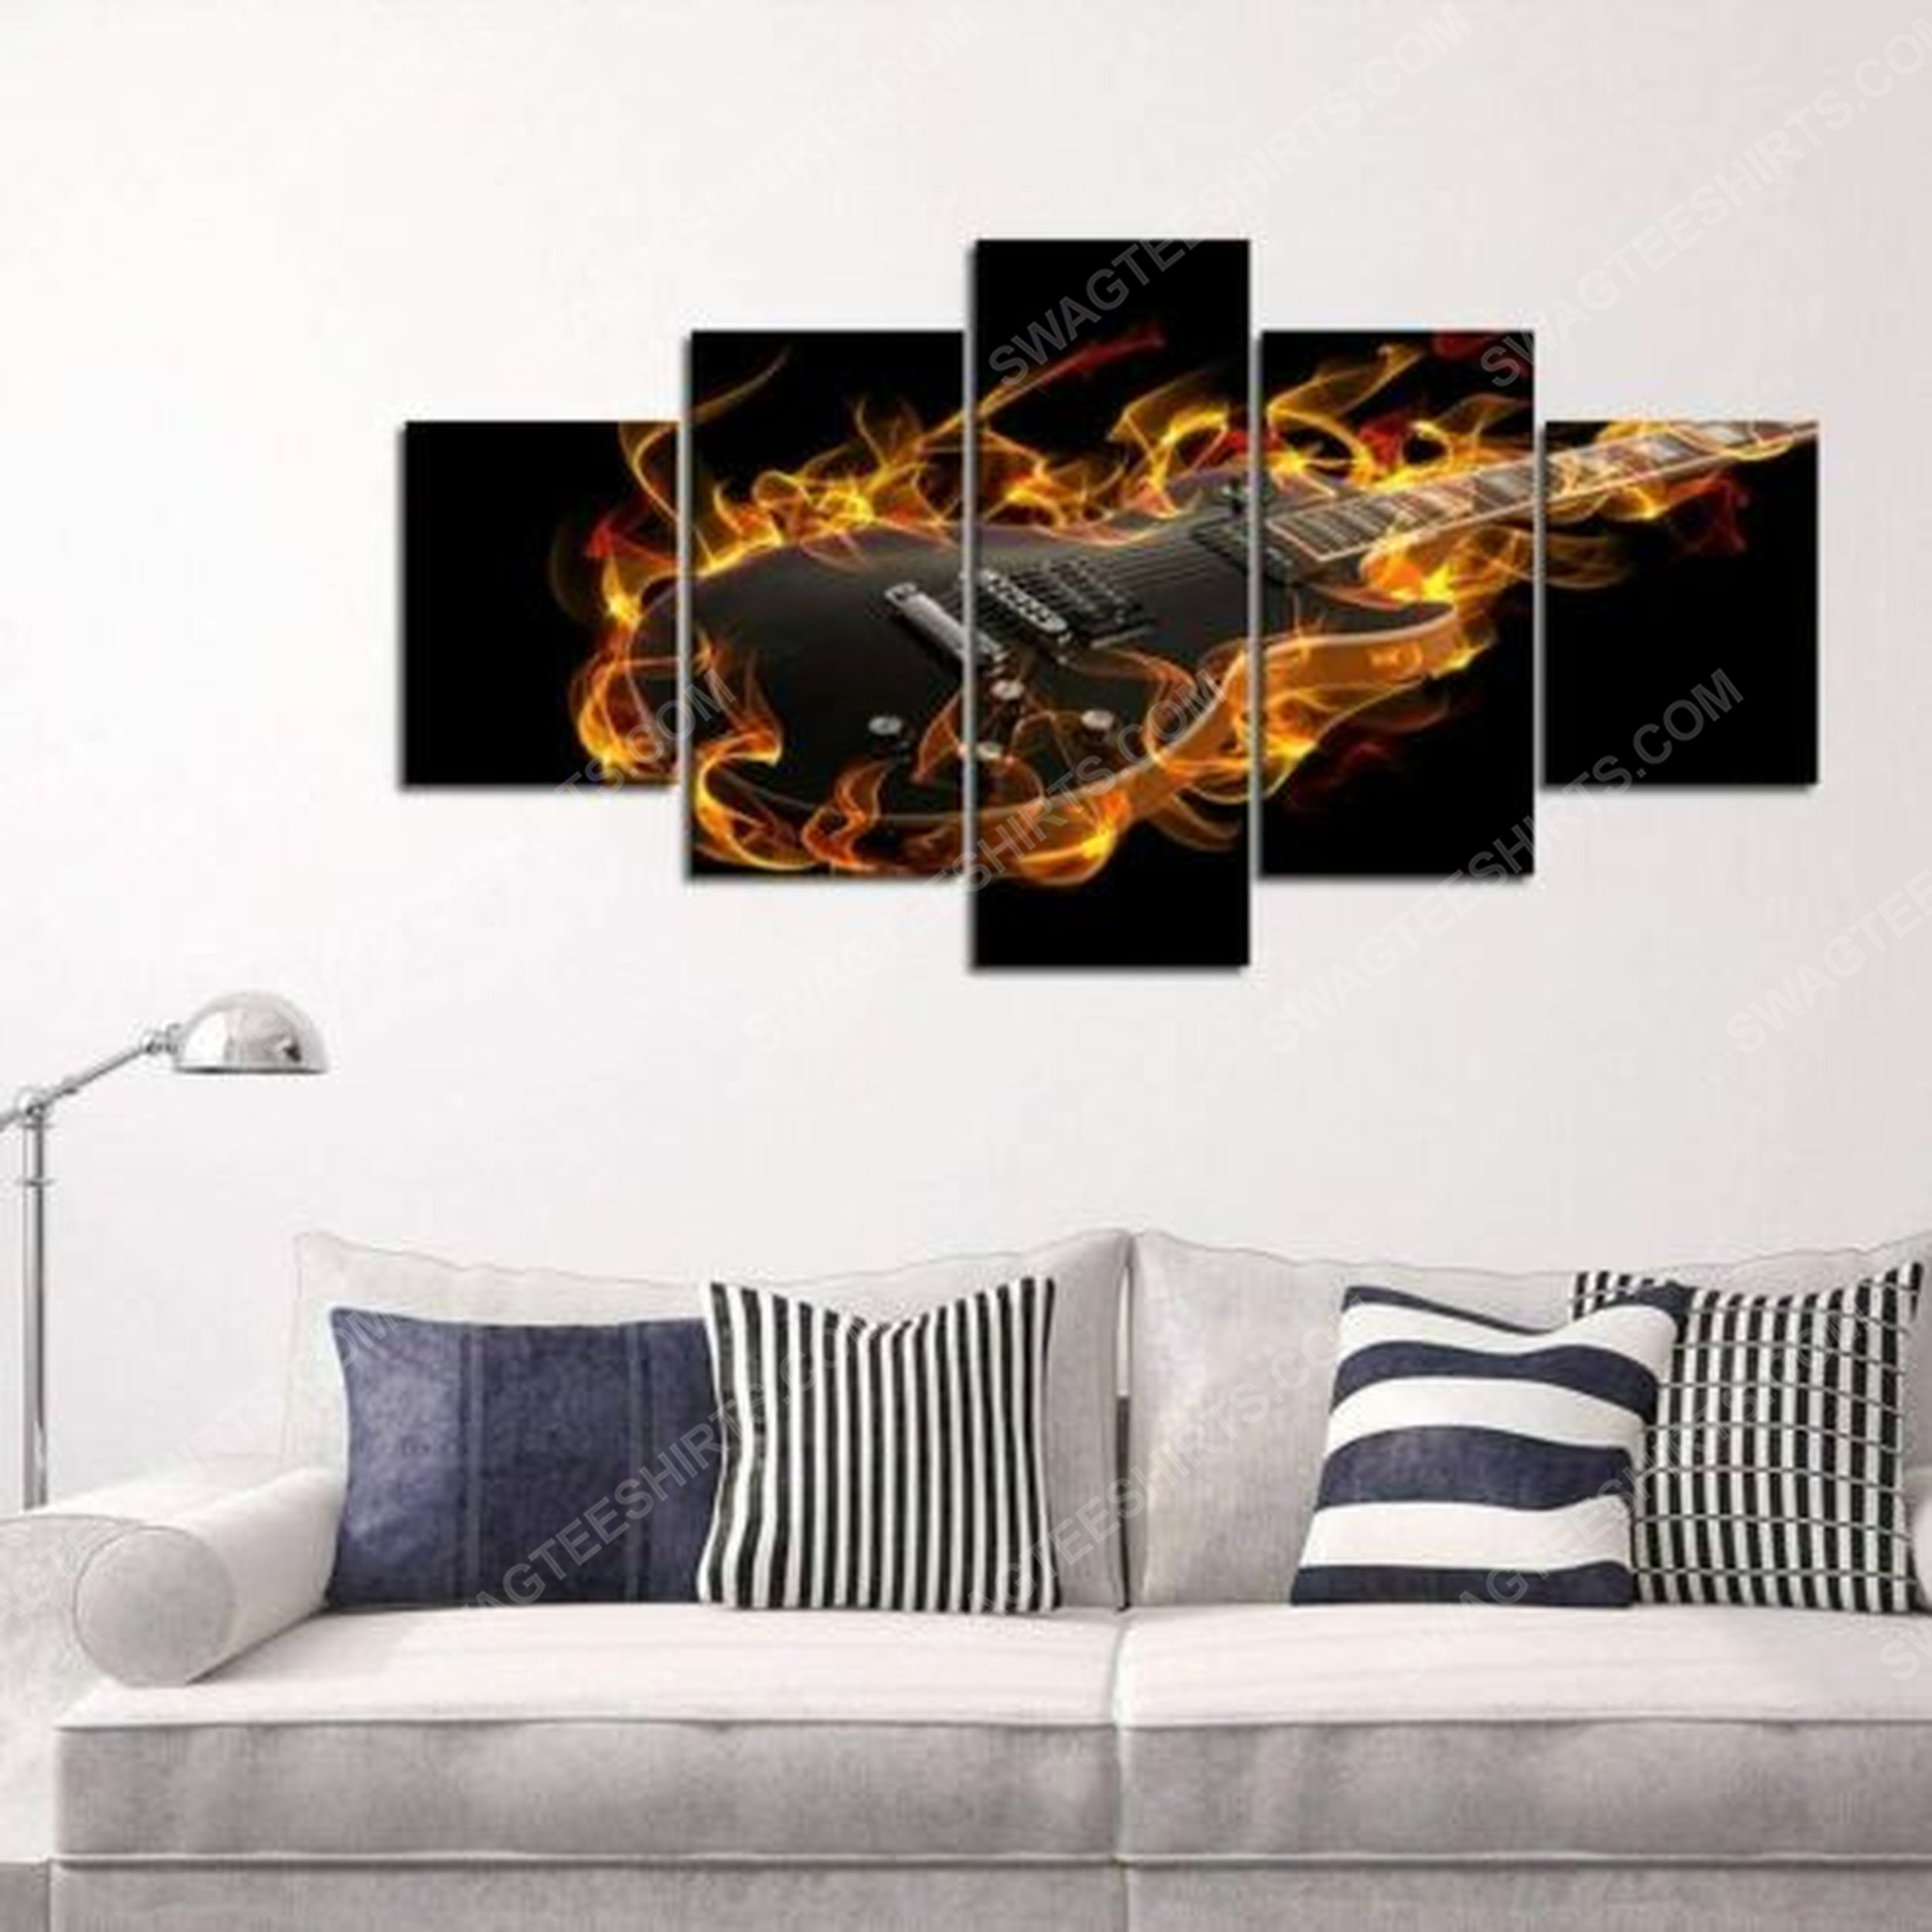 [special edition] Fire guitar music print painting canvas wall art home decor – maria